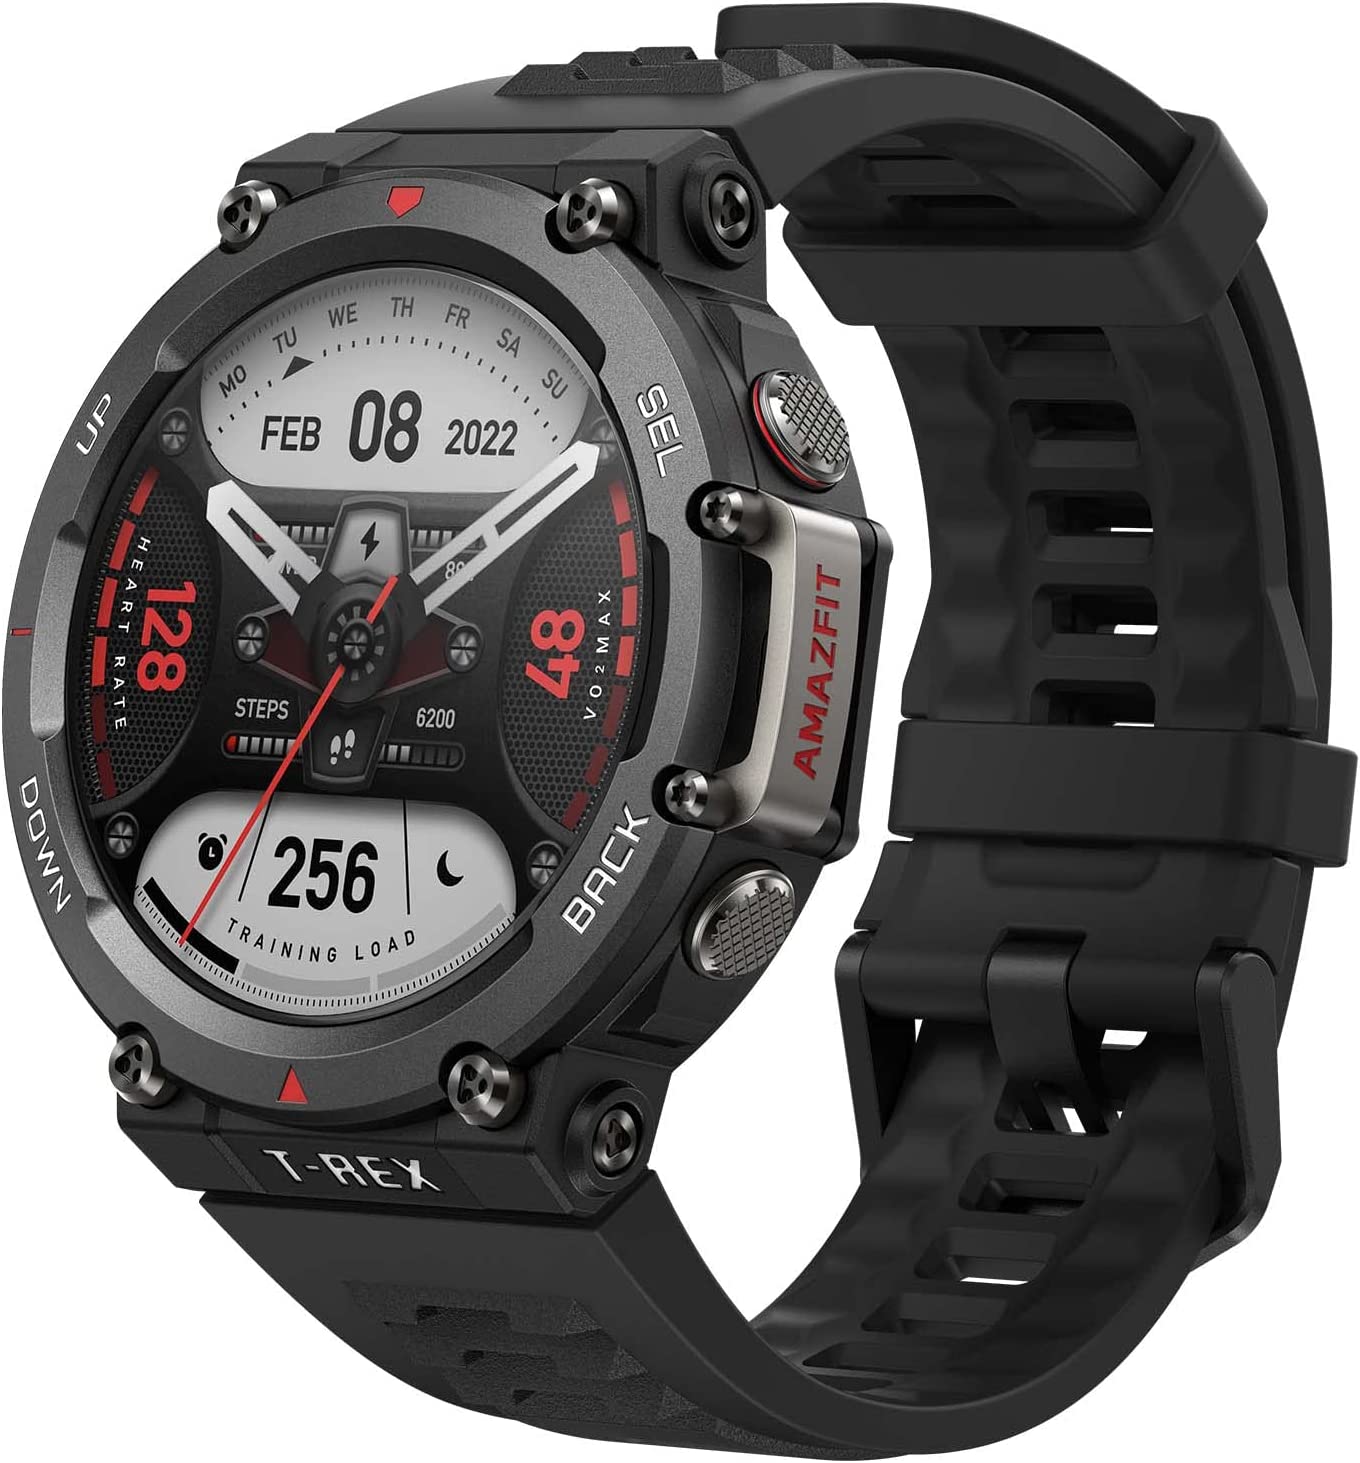 Amazfit T-Rex 2 Smart Watch - Dual-Band & 6 Satellite Positioning, 24-Day Battery Life